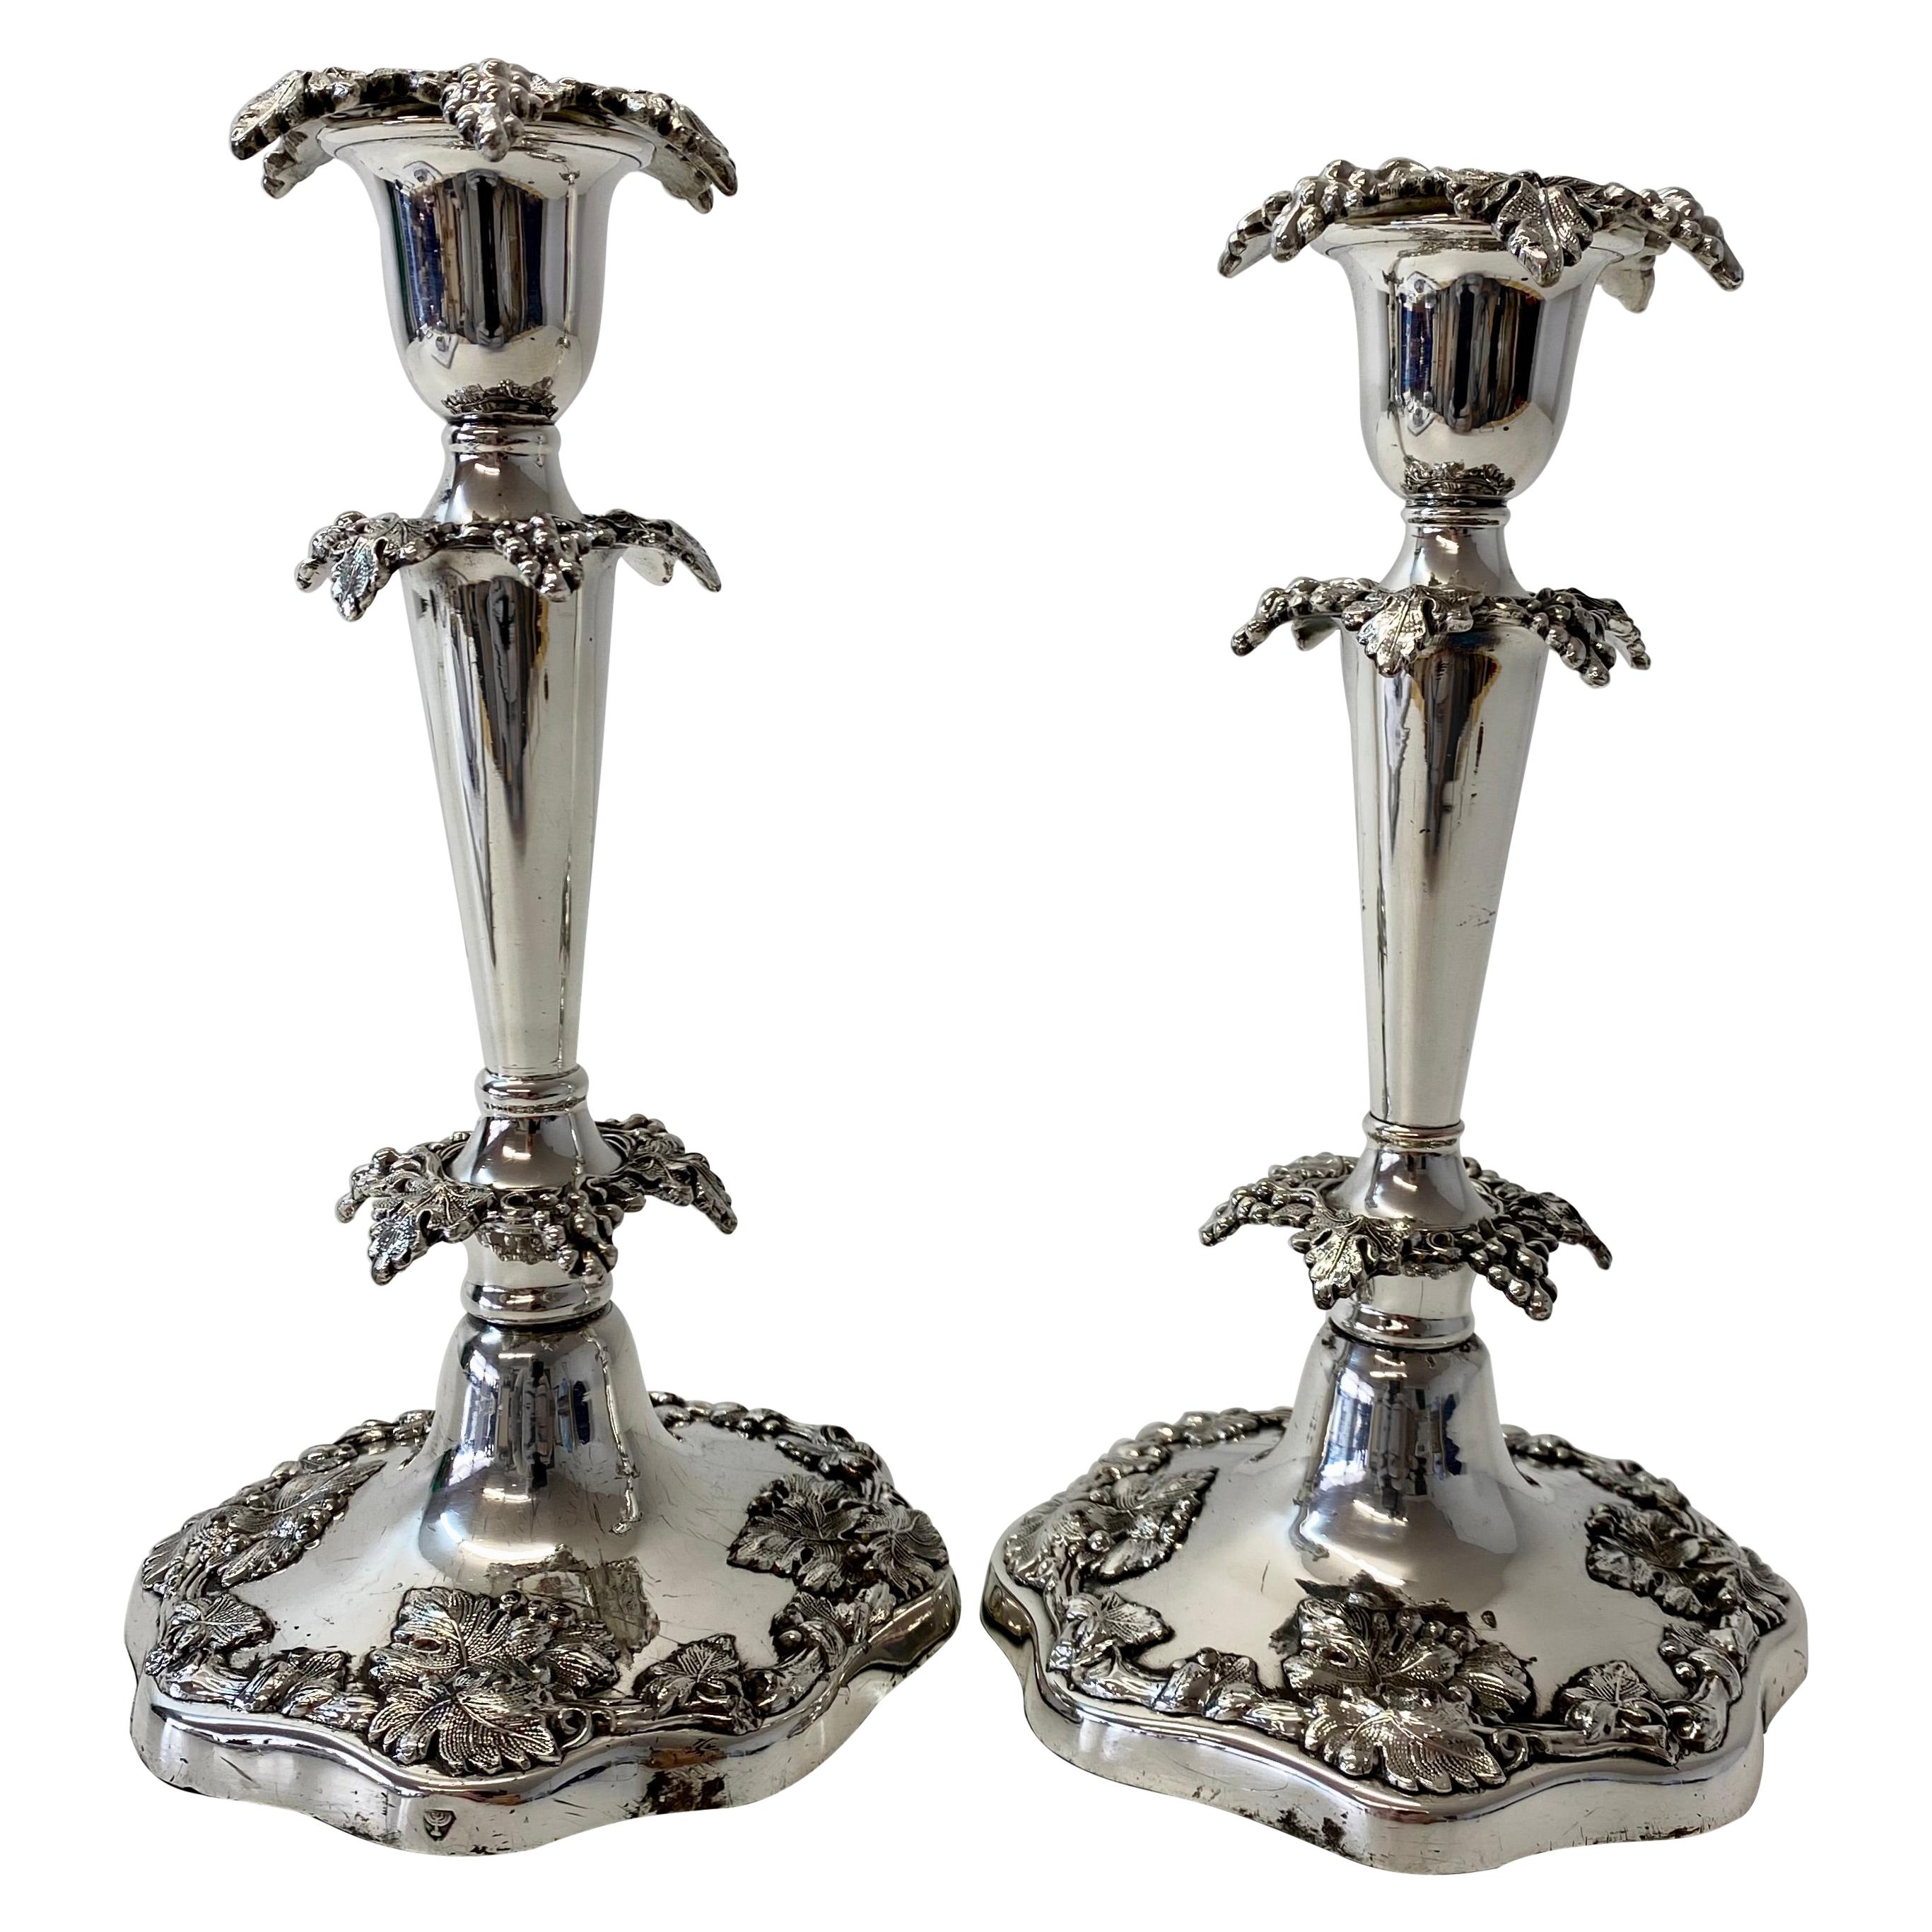 Sheffield Silver Plate Candle Holders W/ Sterling Silver Mounts, Mid 20th C.